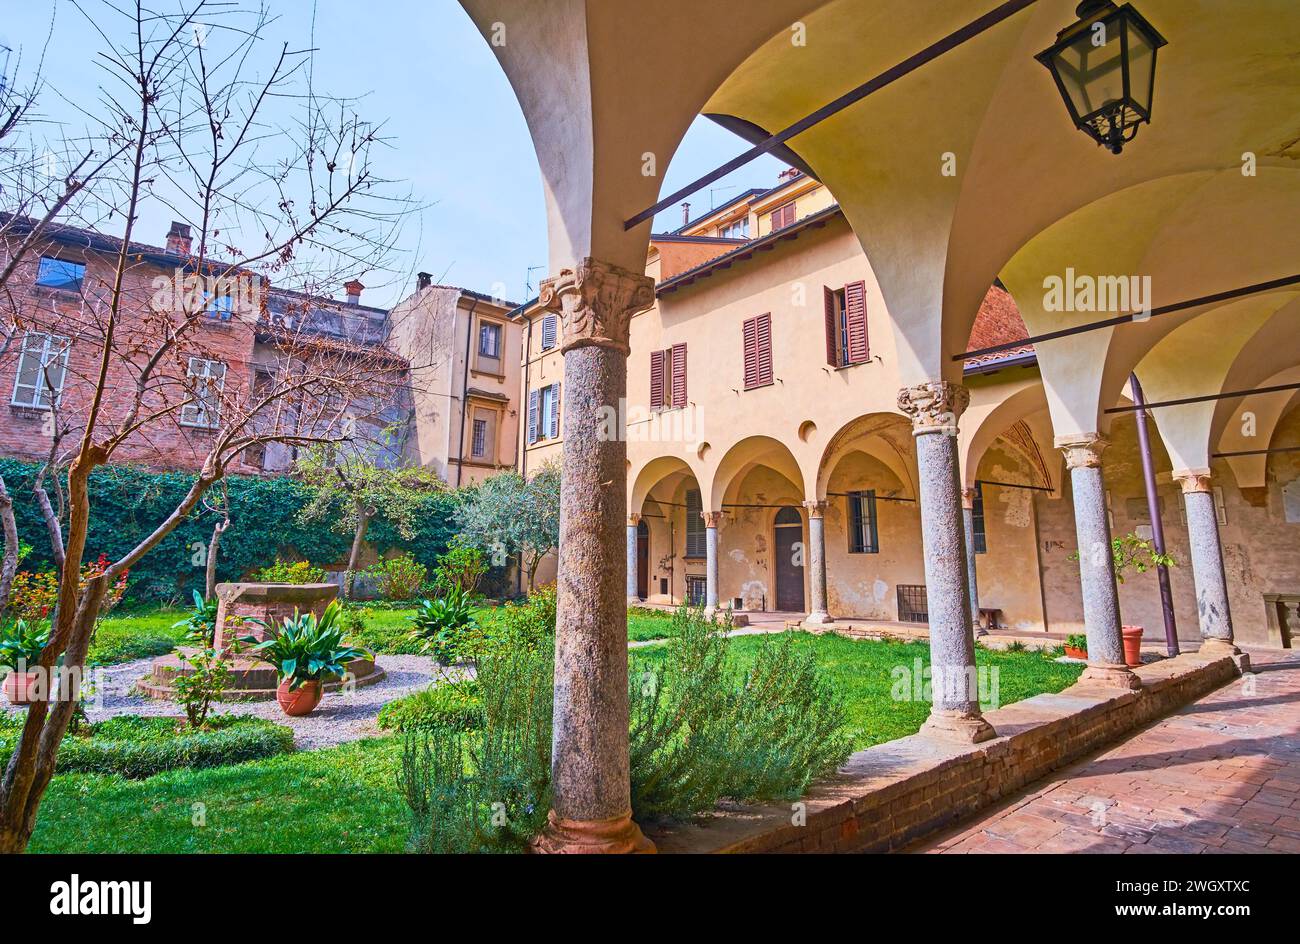 Panorama of the small cloister of St Antoninus Basilica with green garden and shady arcades, Piacenza, Italy Stock Photo